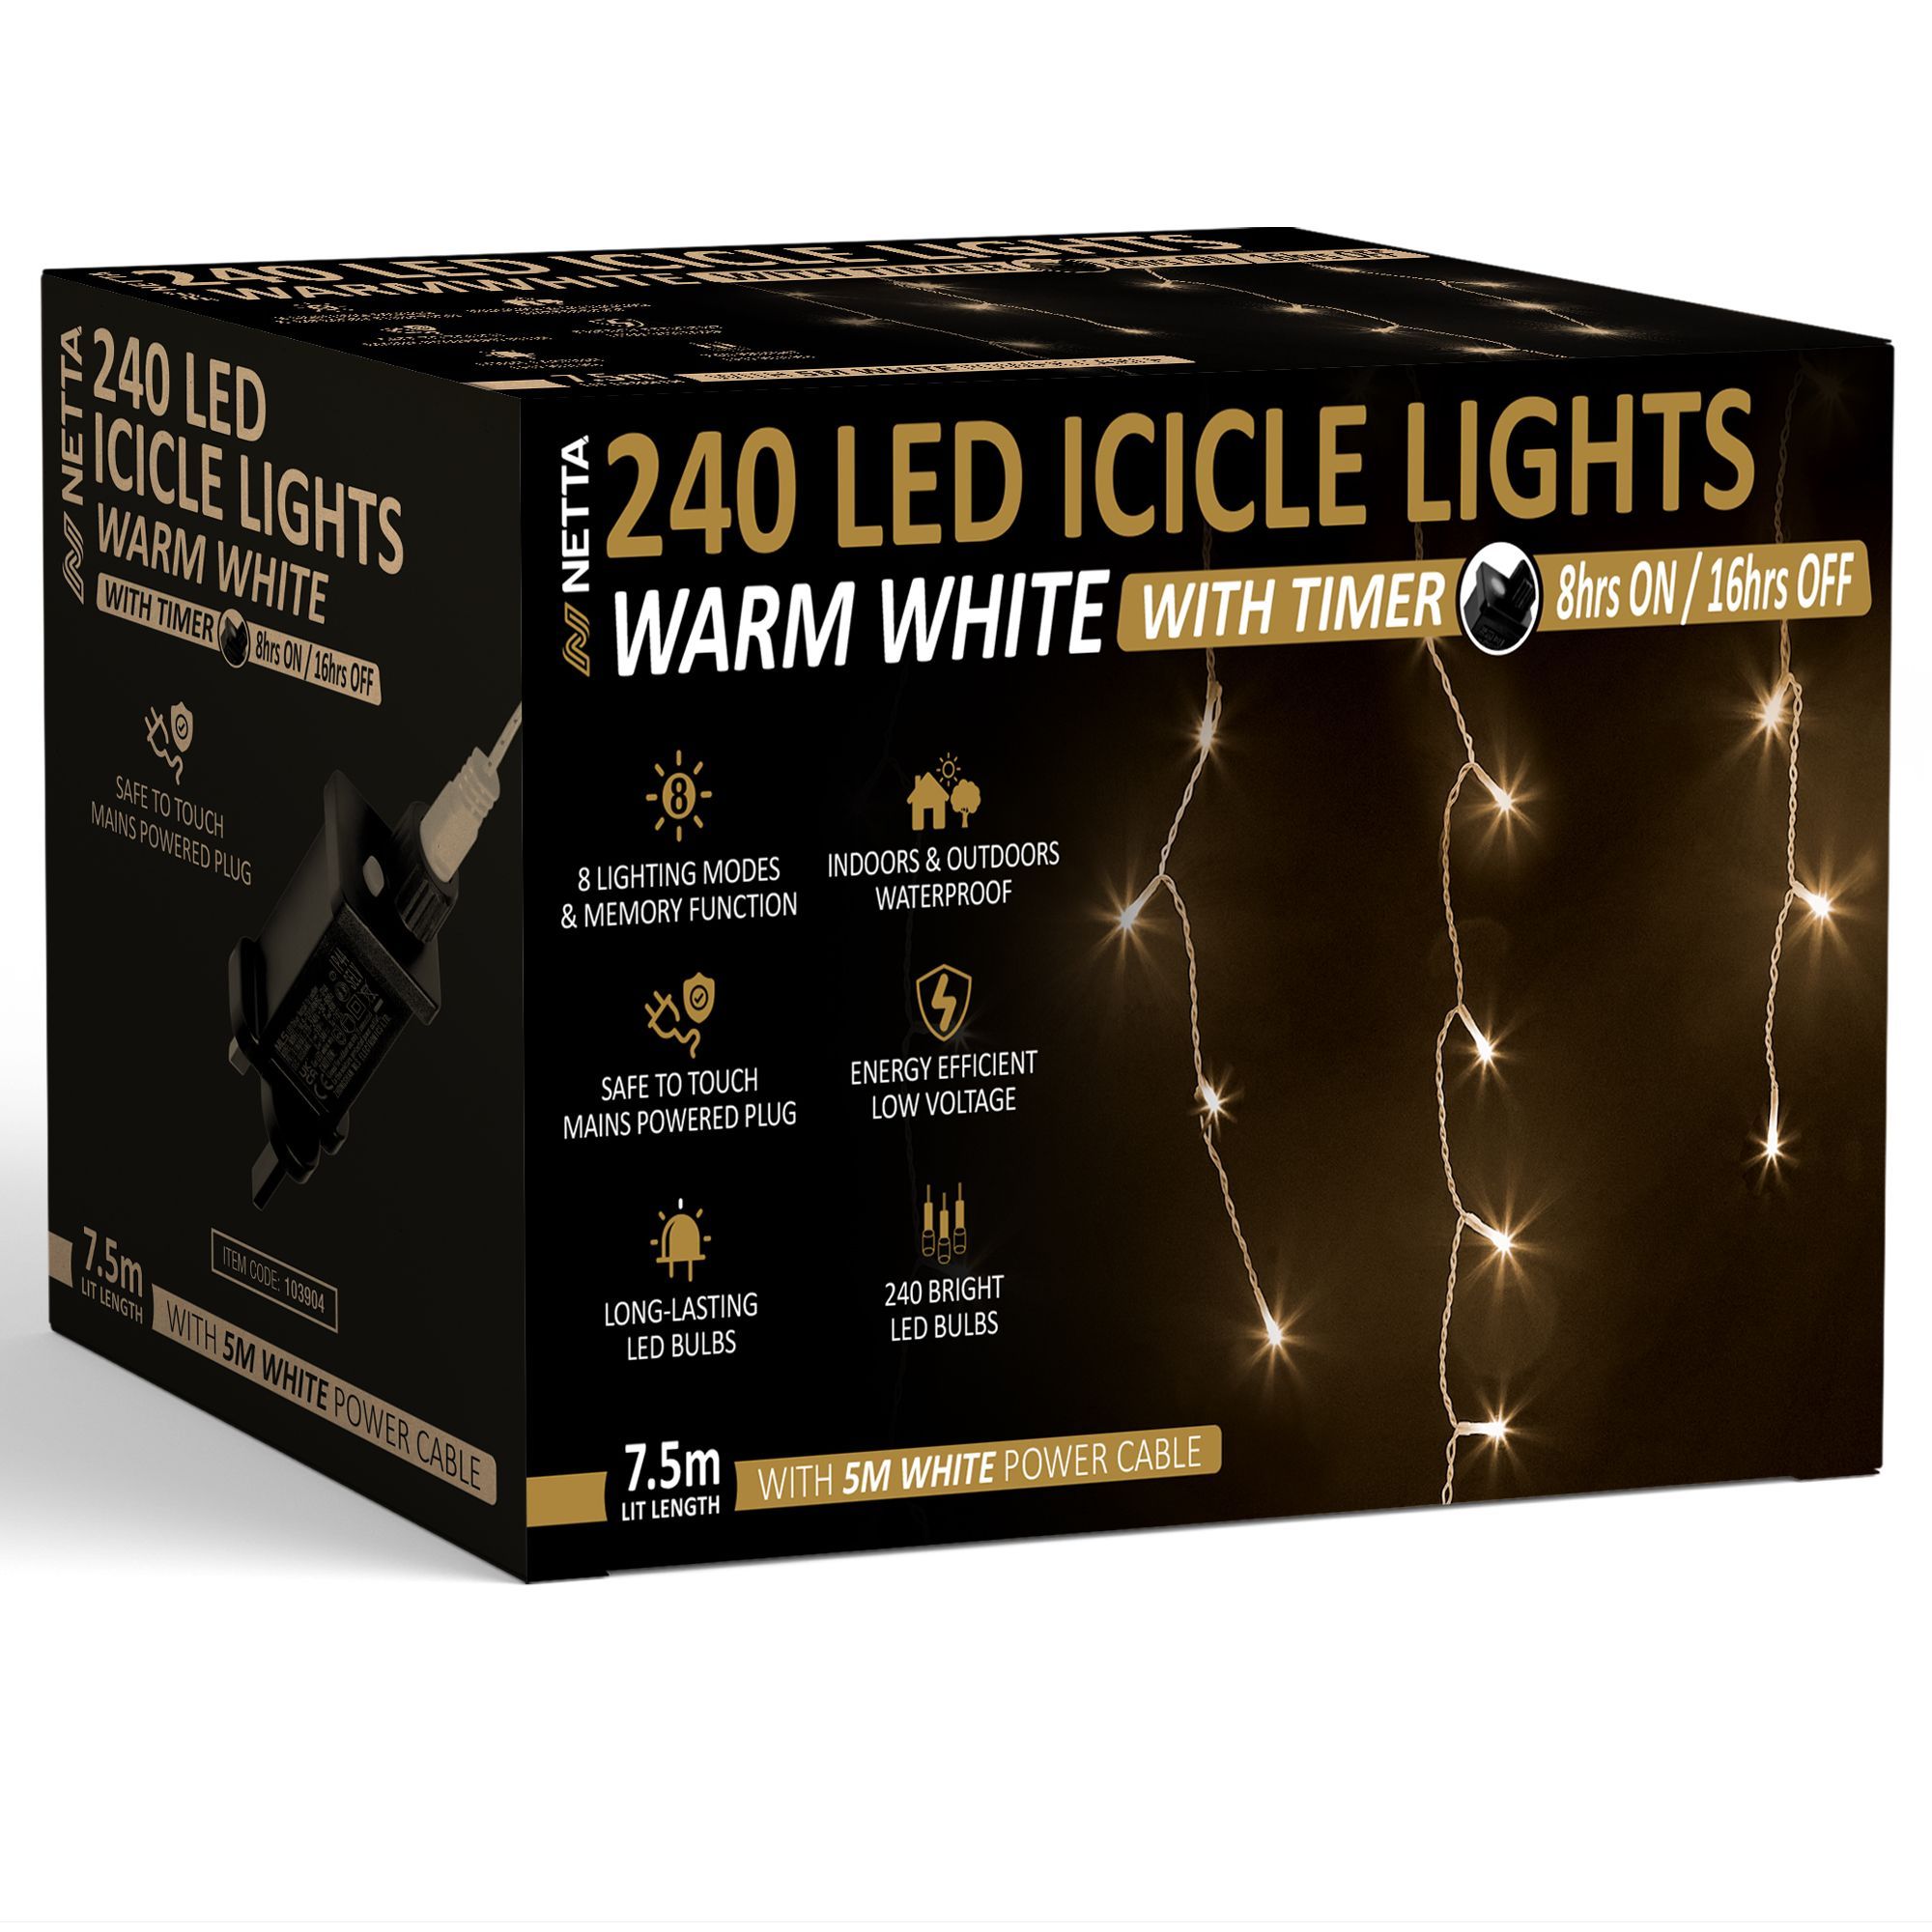 NETTA 240 LED Icicle Lights 7.5M Outdoor Christmas Lights - Warm White, with White Cable